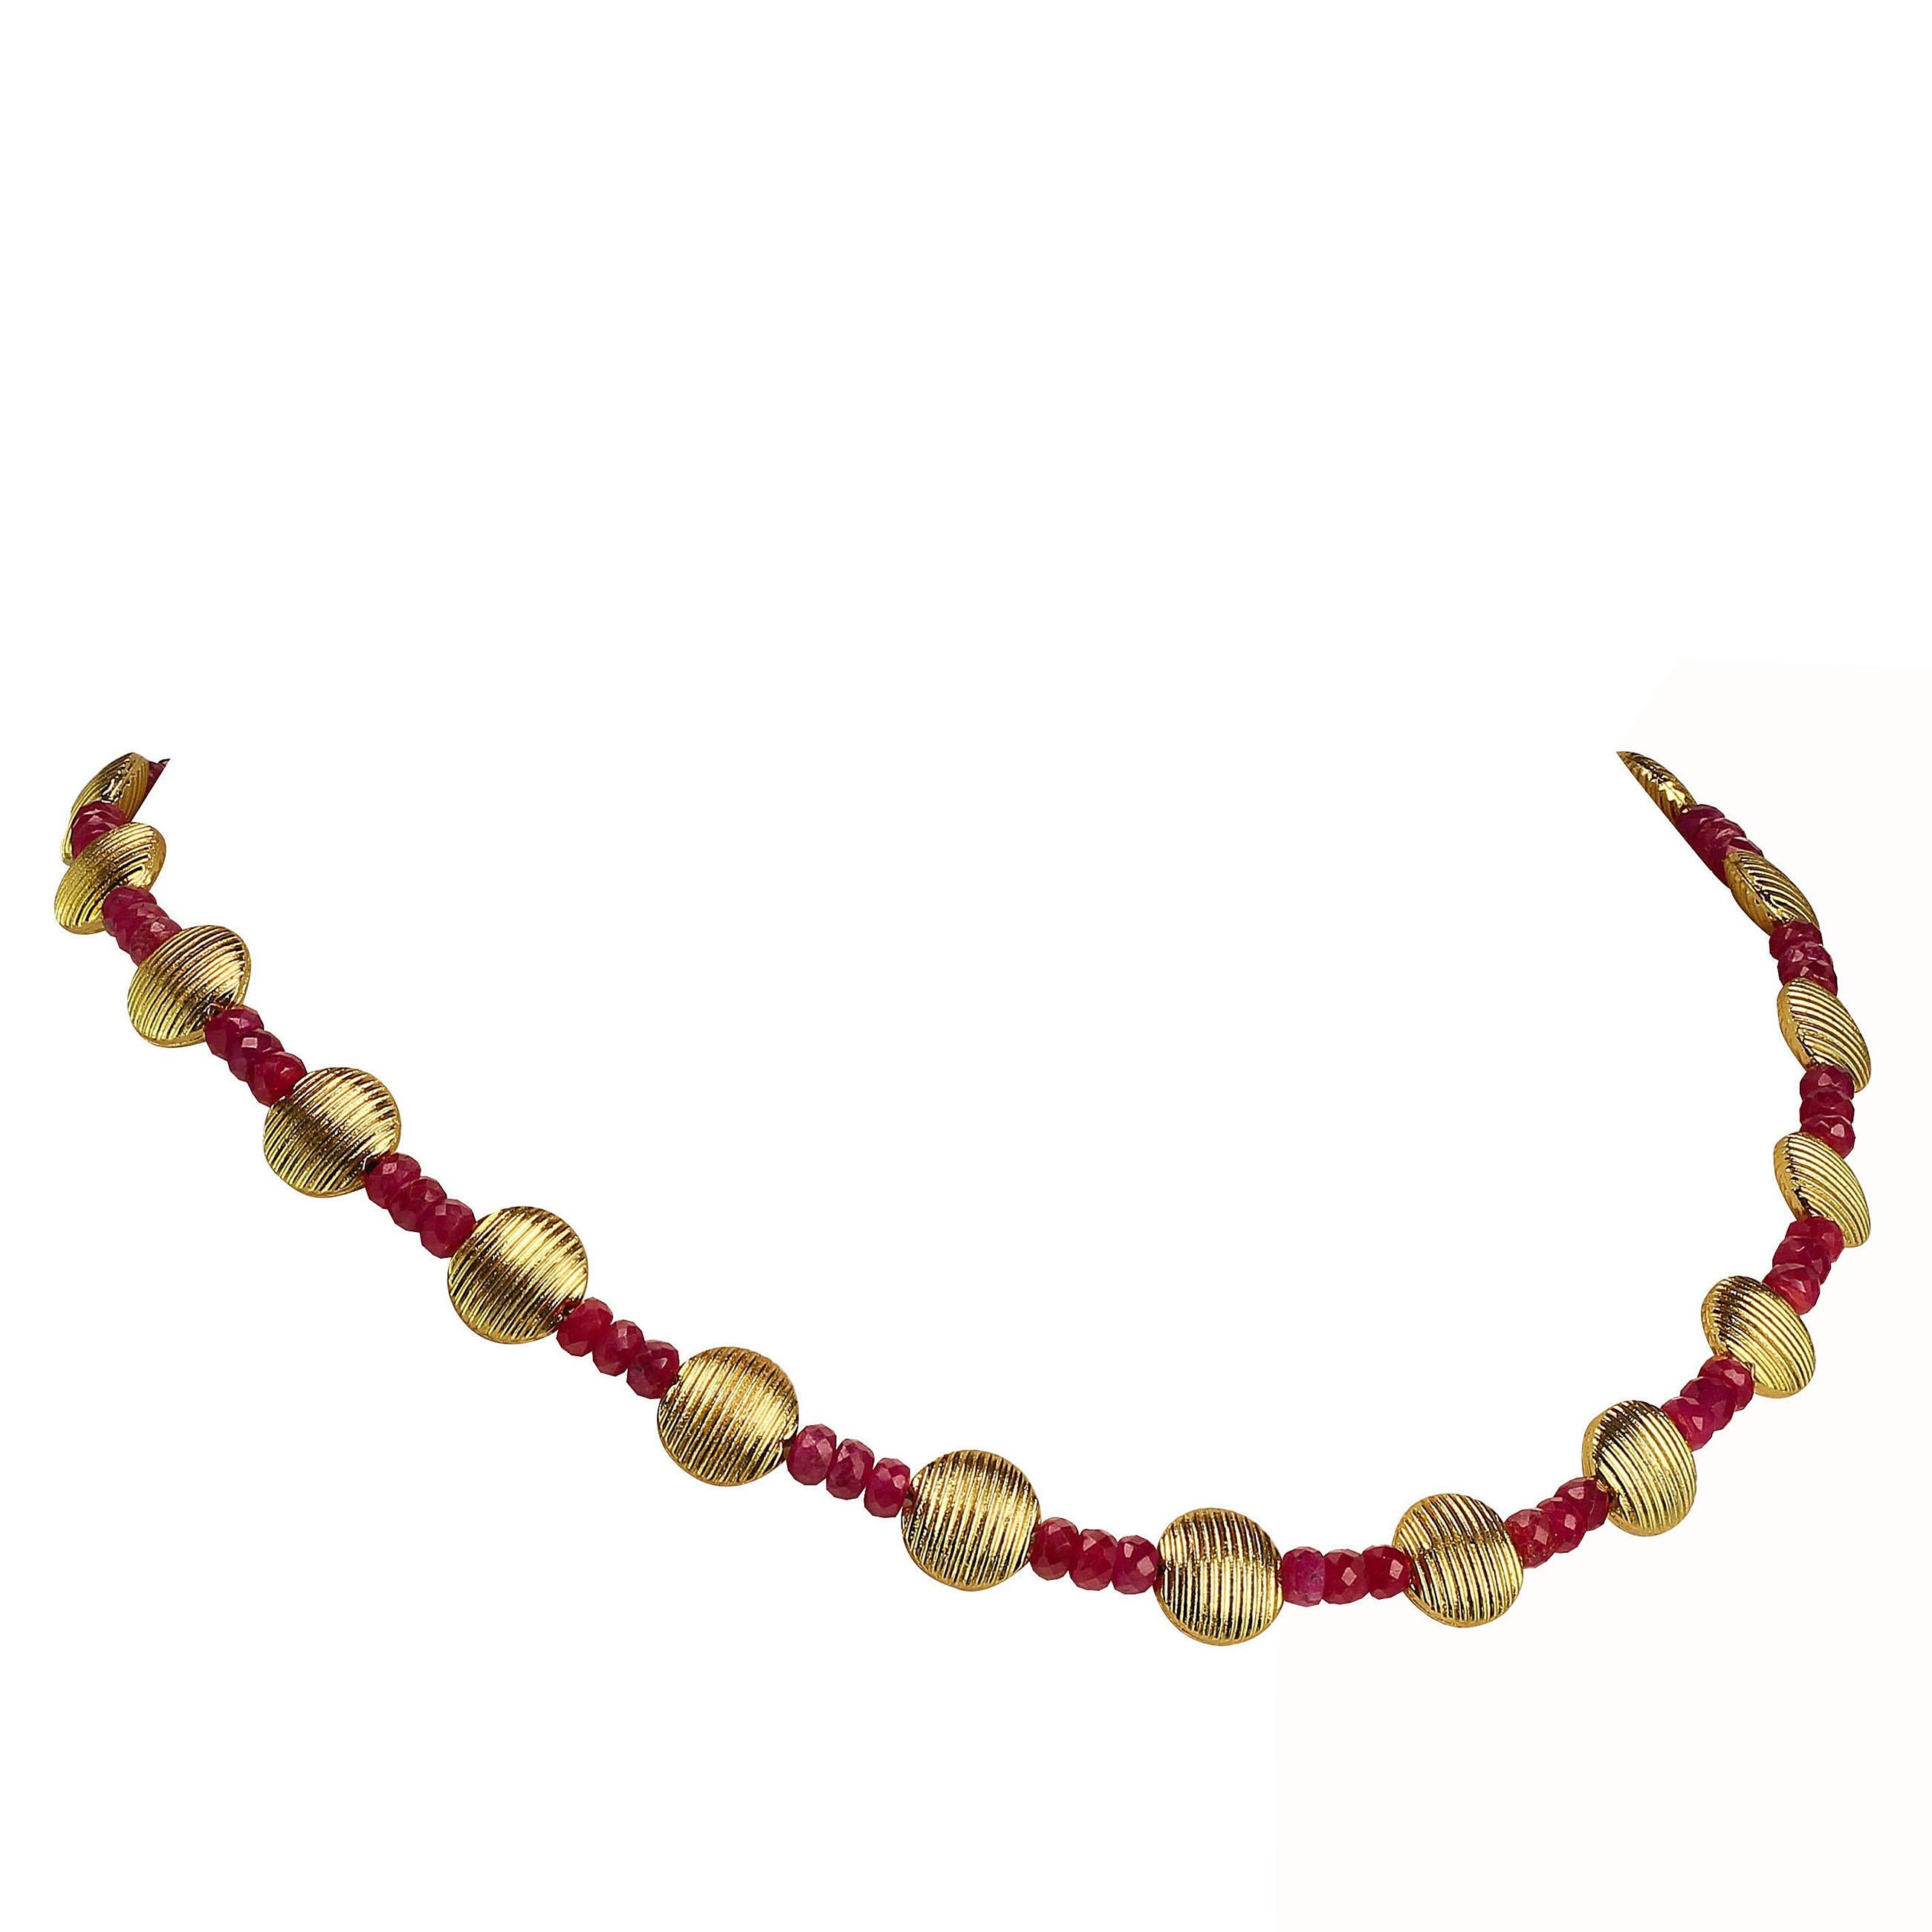  AJD 17 Inch Ruby and Gold Choker Necklace